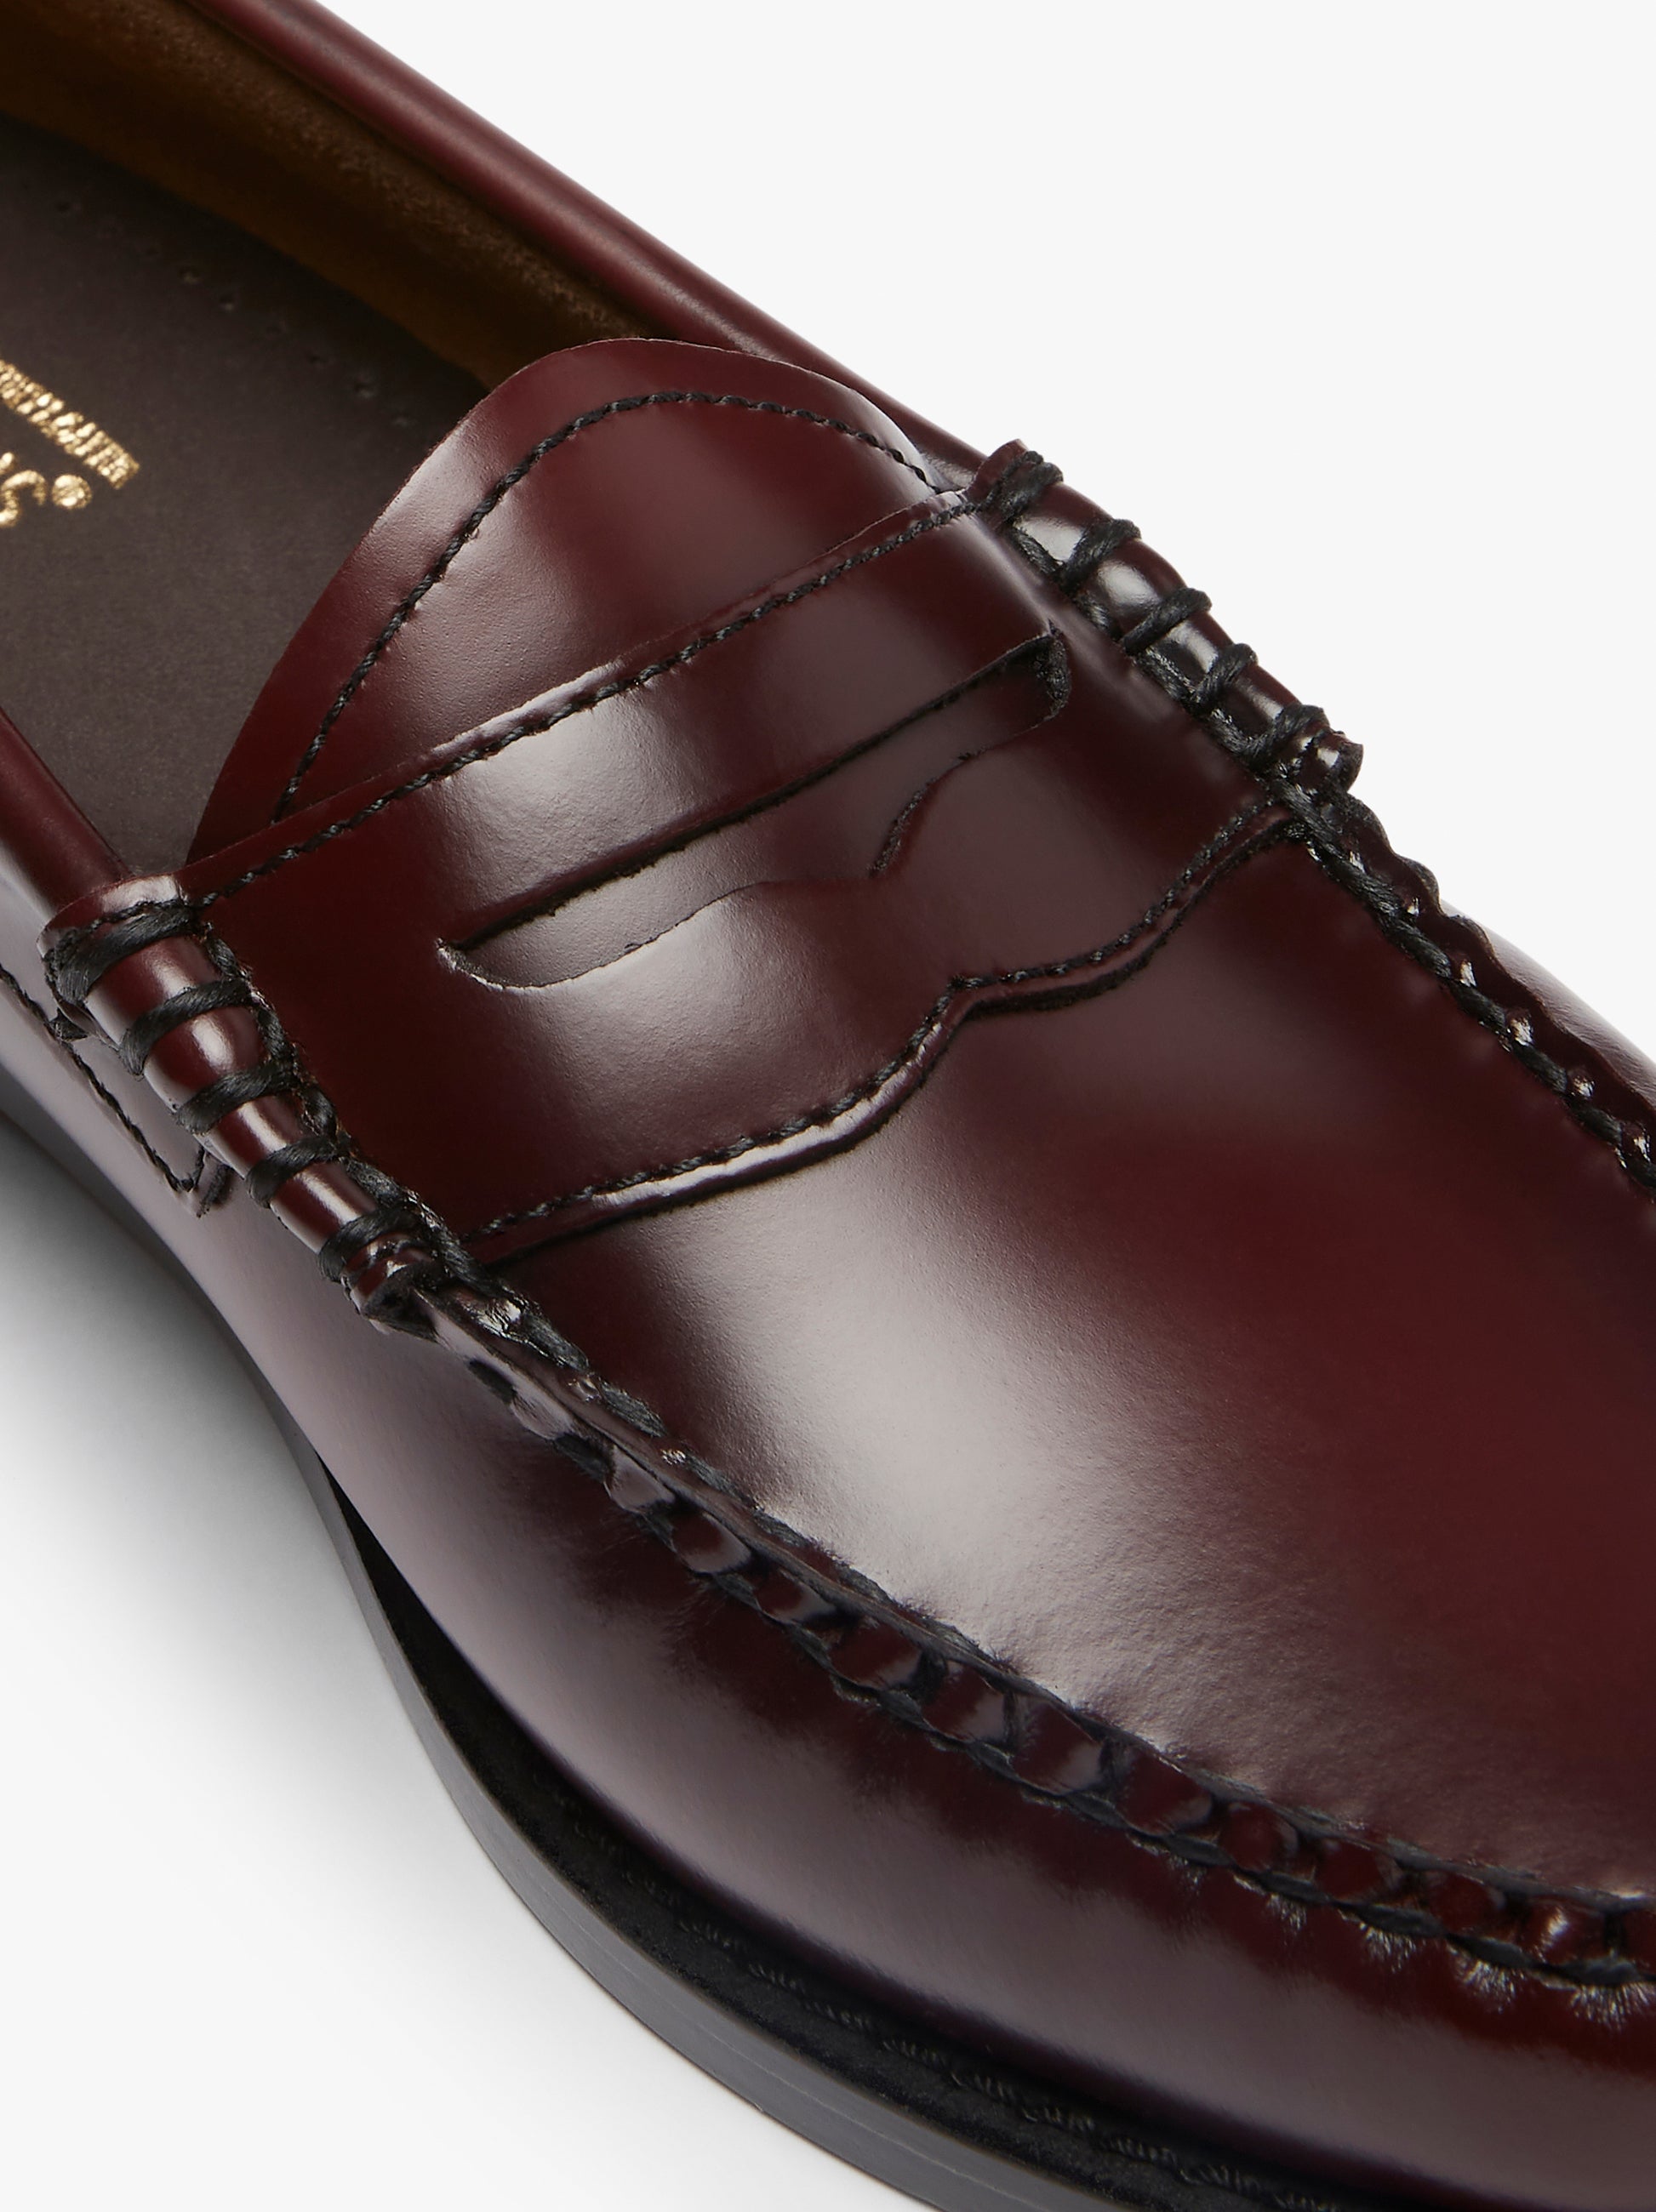 Bass Weejuns Burgundy | Burgundy Leather Loafers – G.H.BASS – G.H.